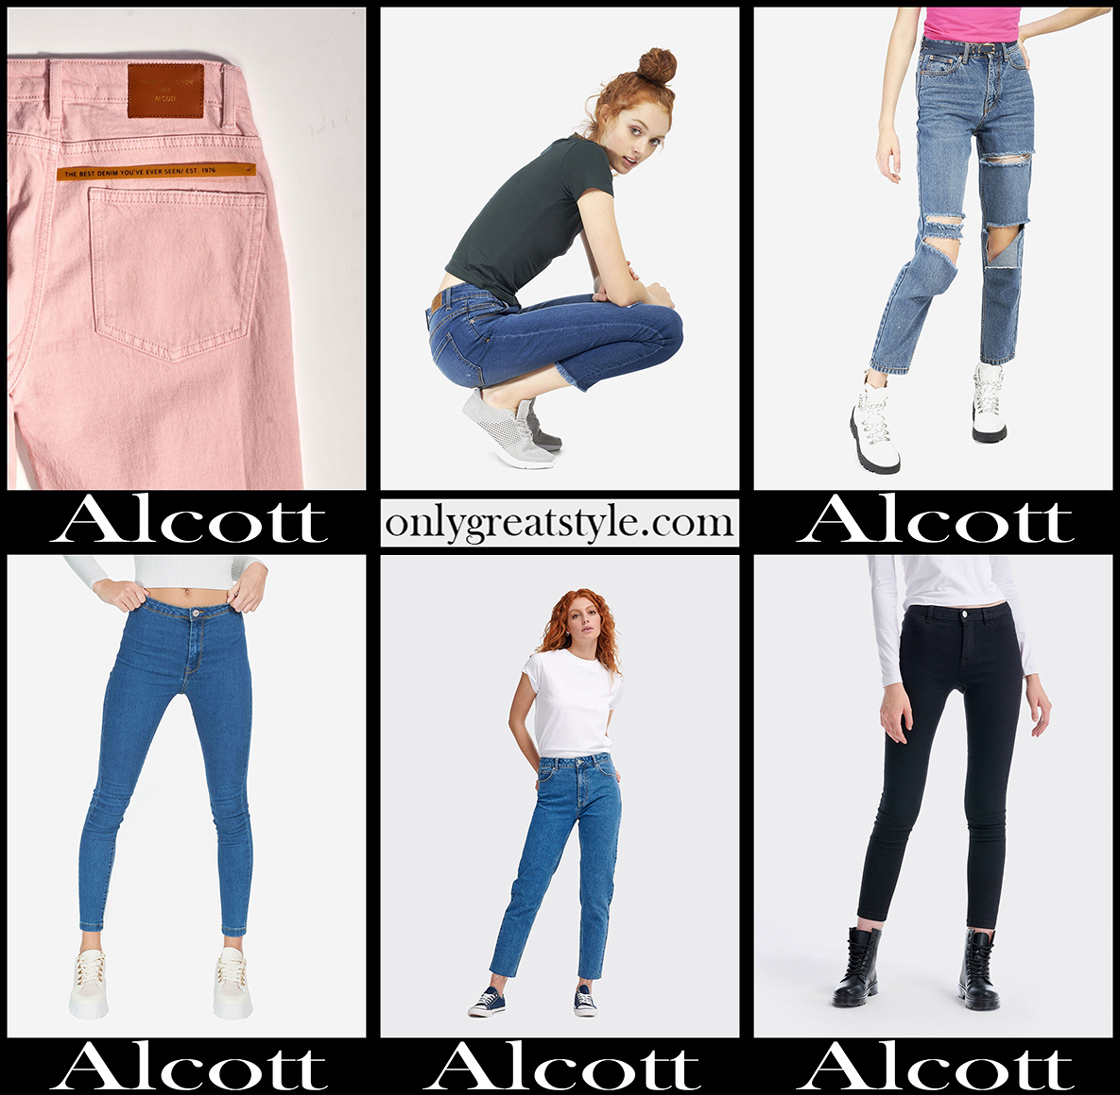 Alcott jeans 2021 new arrivals womens clothing